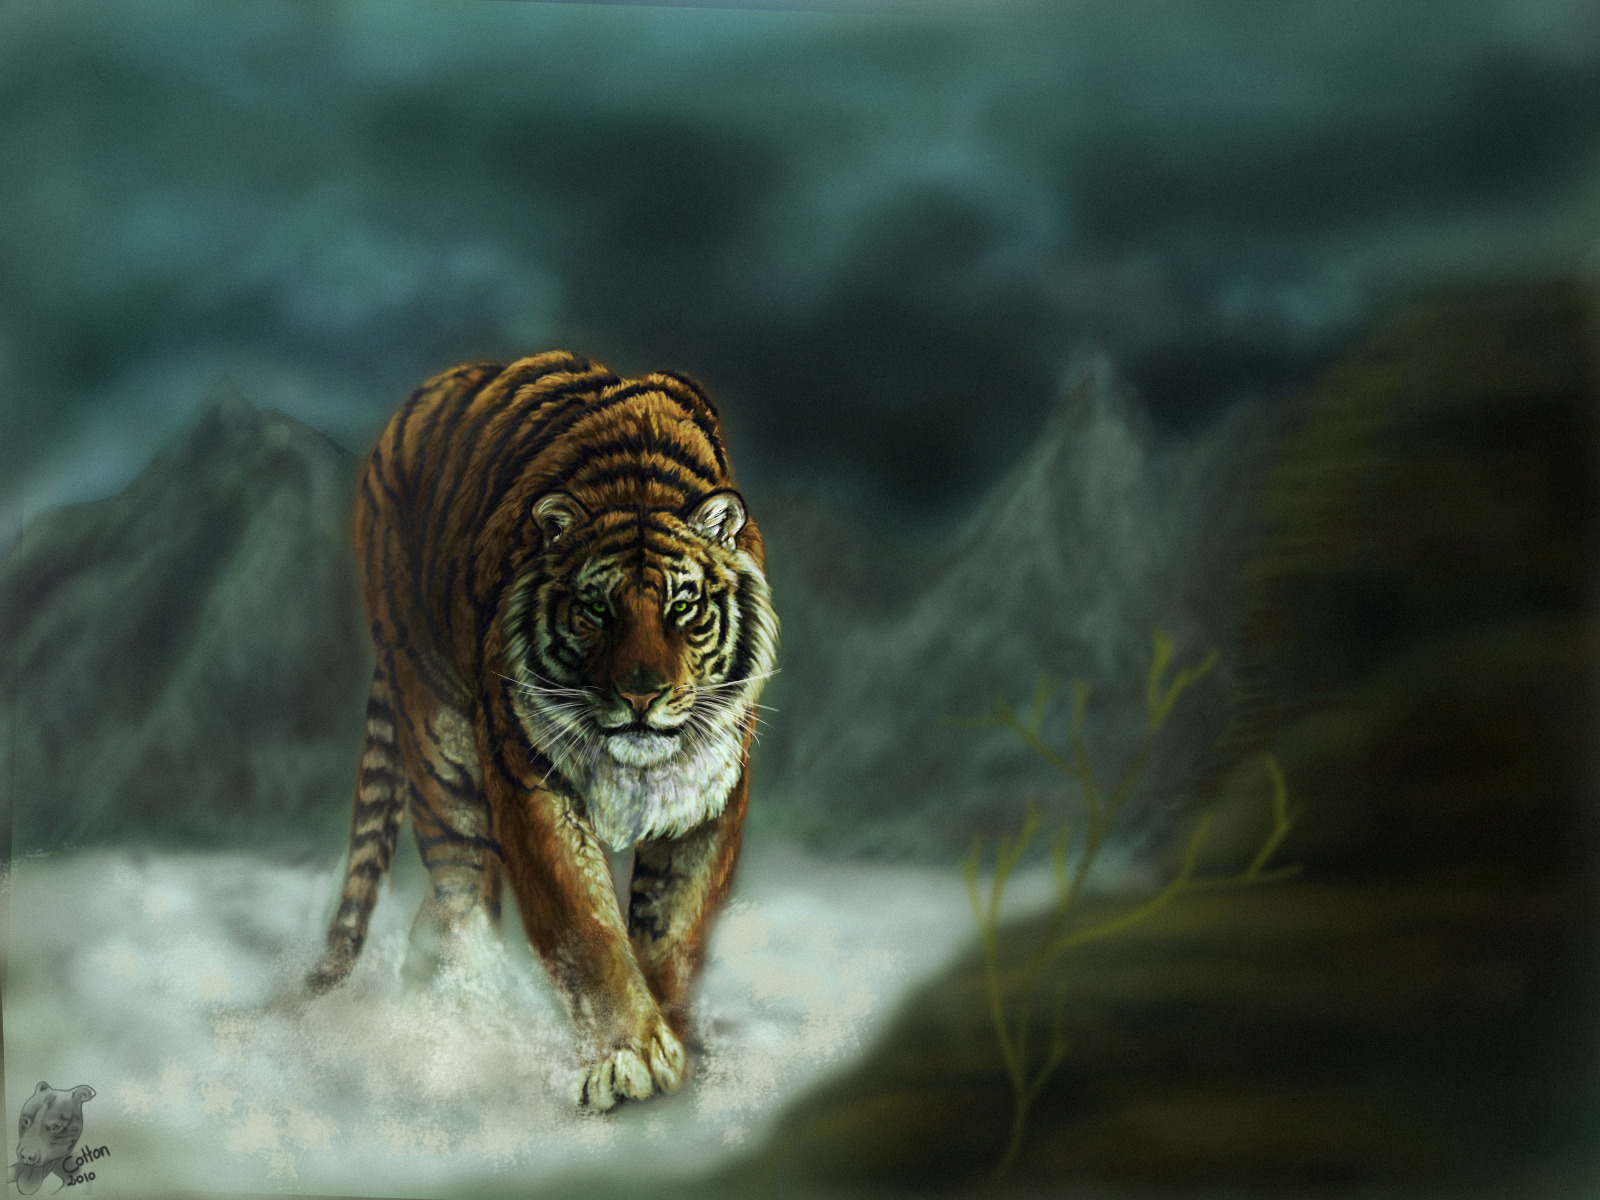 Bengal Tiger 3D - Cats & Animals Background Wallpapers on Desktop